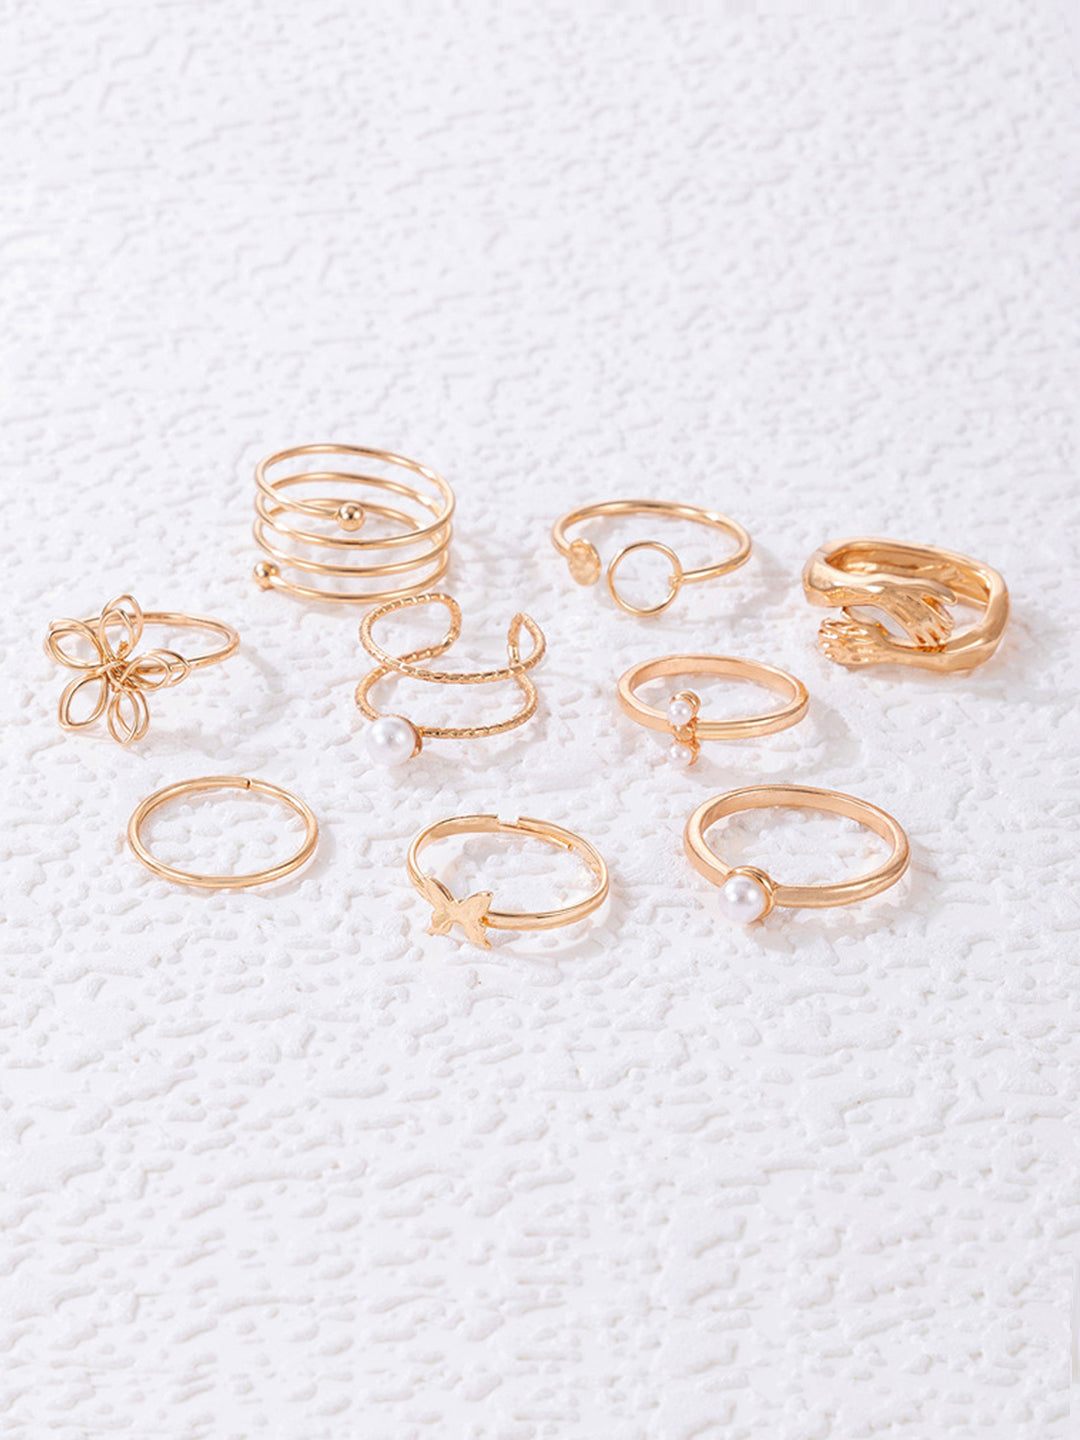 Set of 9 Classic Everyday Rings